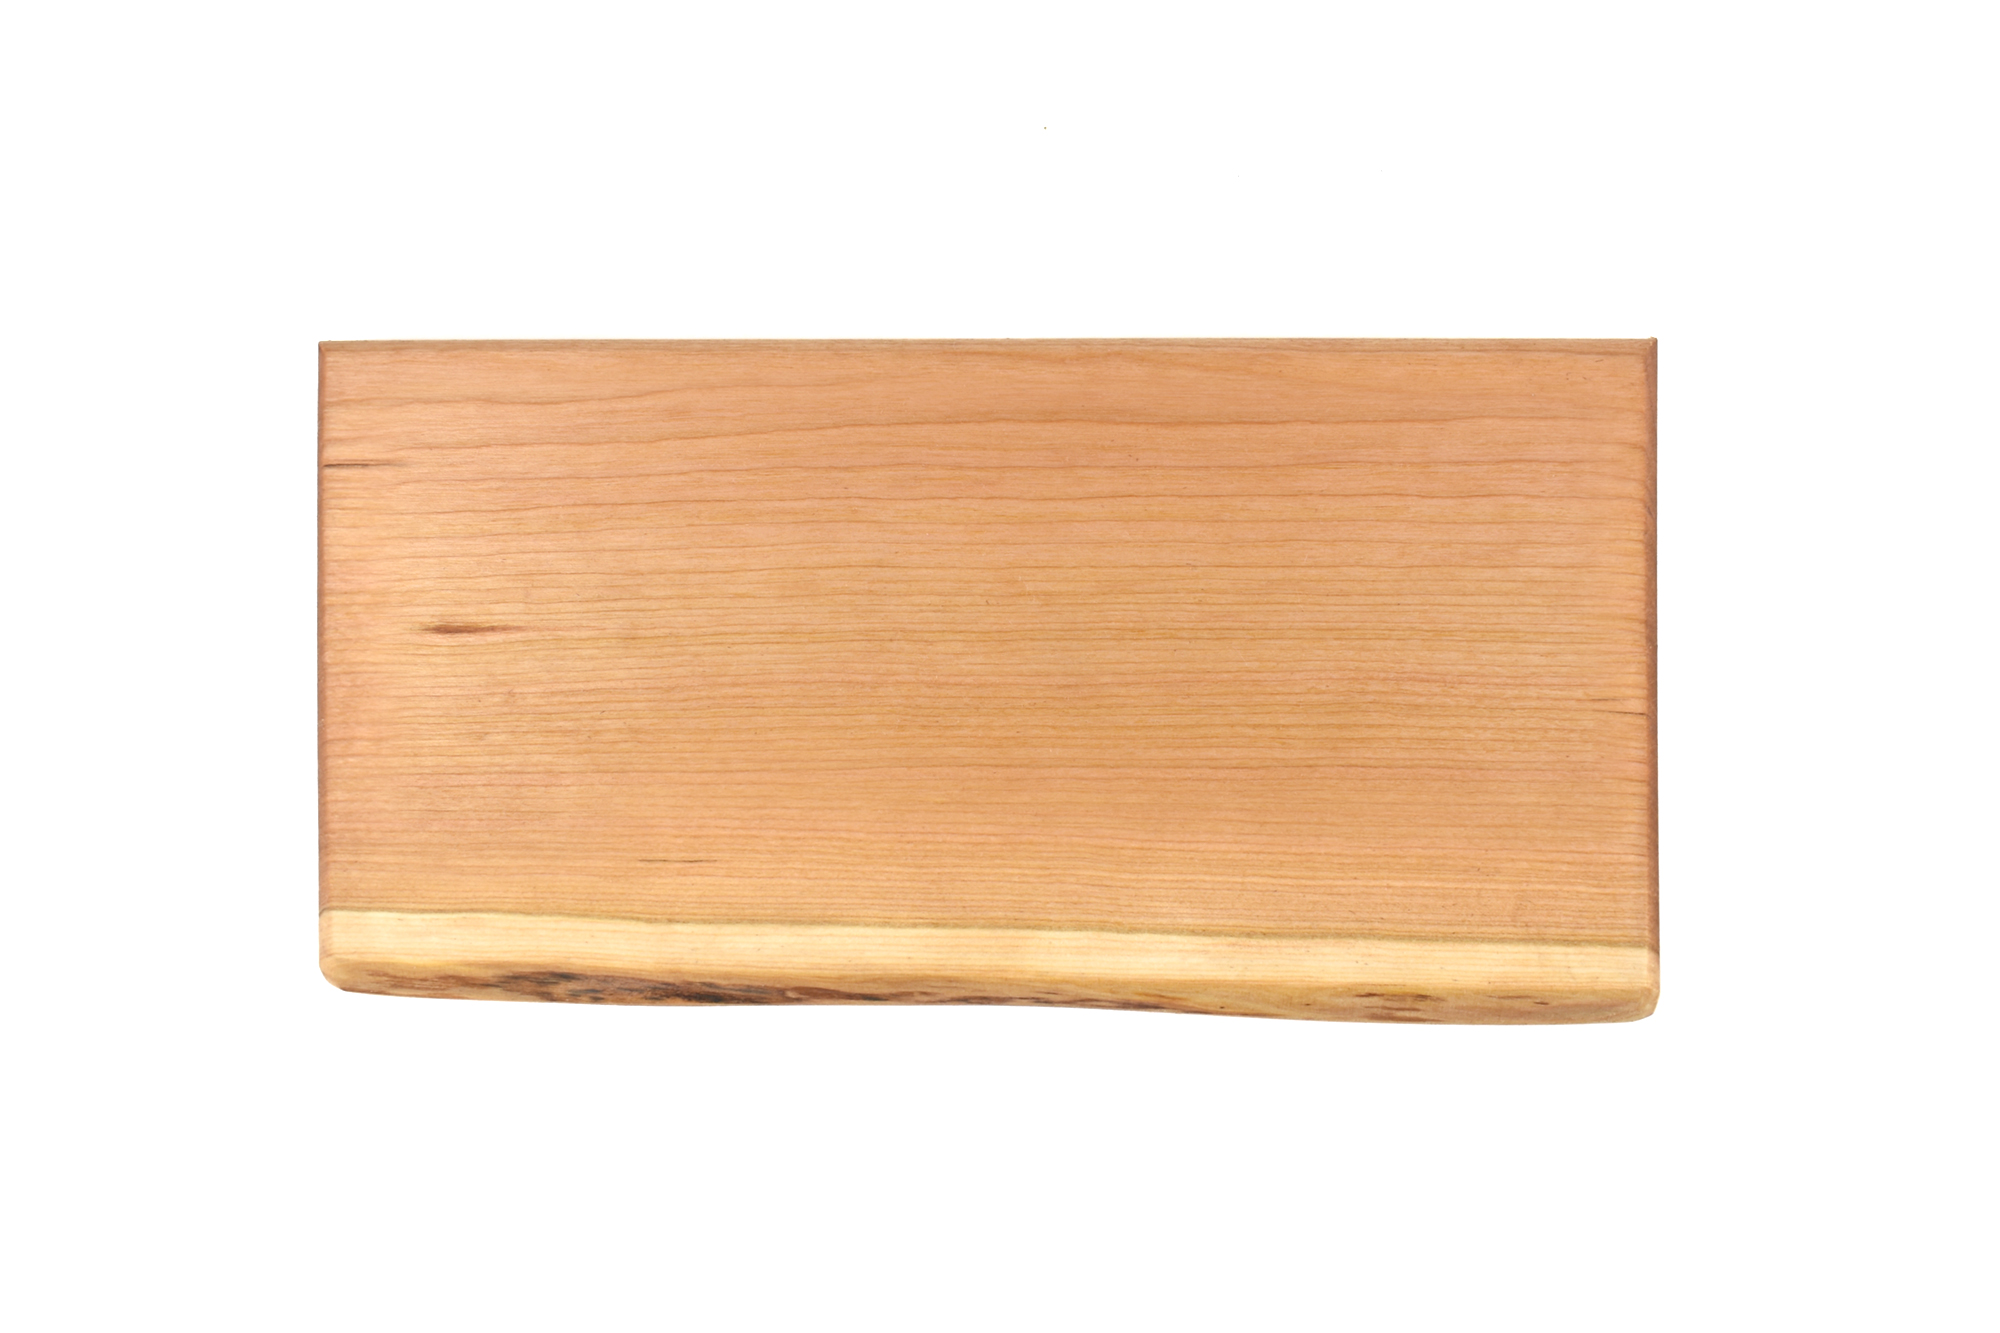 Small live edge cherry wood serving tray